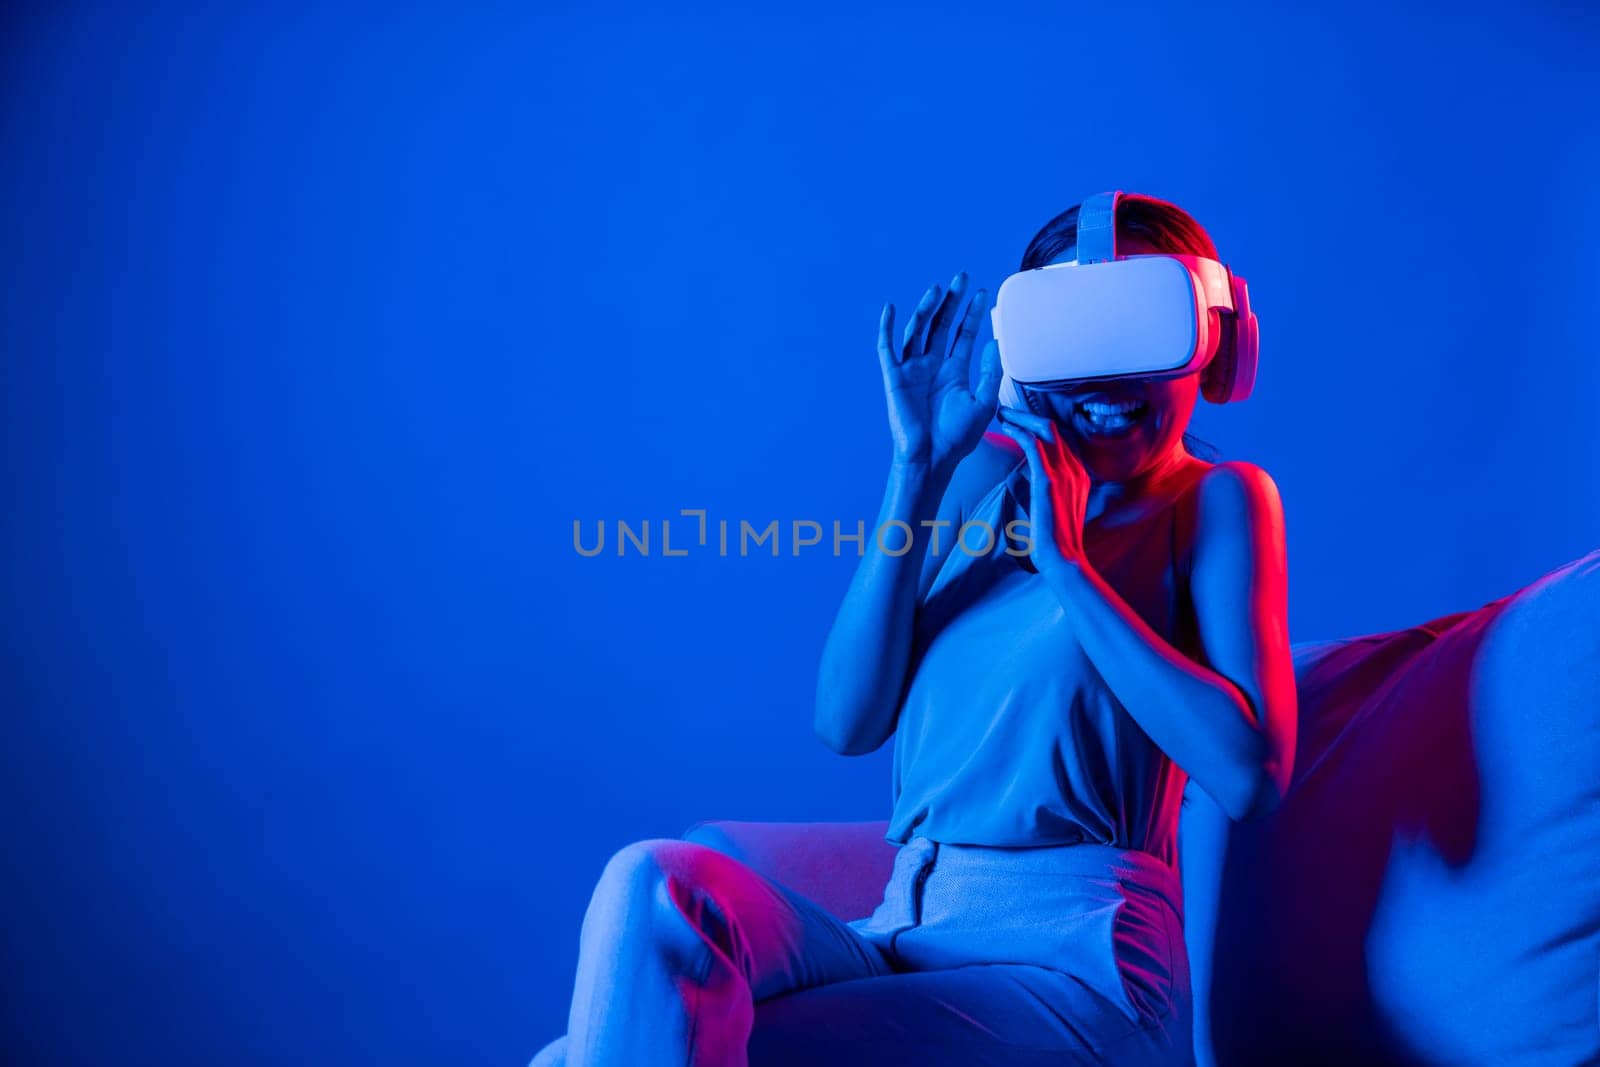 Smart female sitting on sofa surrounded by neon light wear VR headset connect metaverse, futuristic cyberspace community technology. Elegant woman excited and emotionally watch movie. Hallucination.